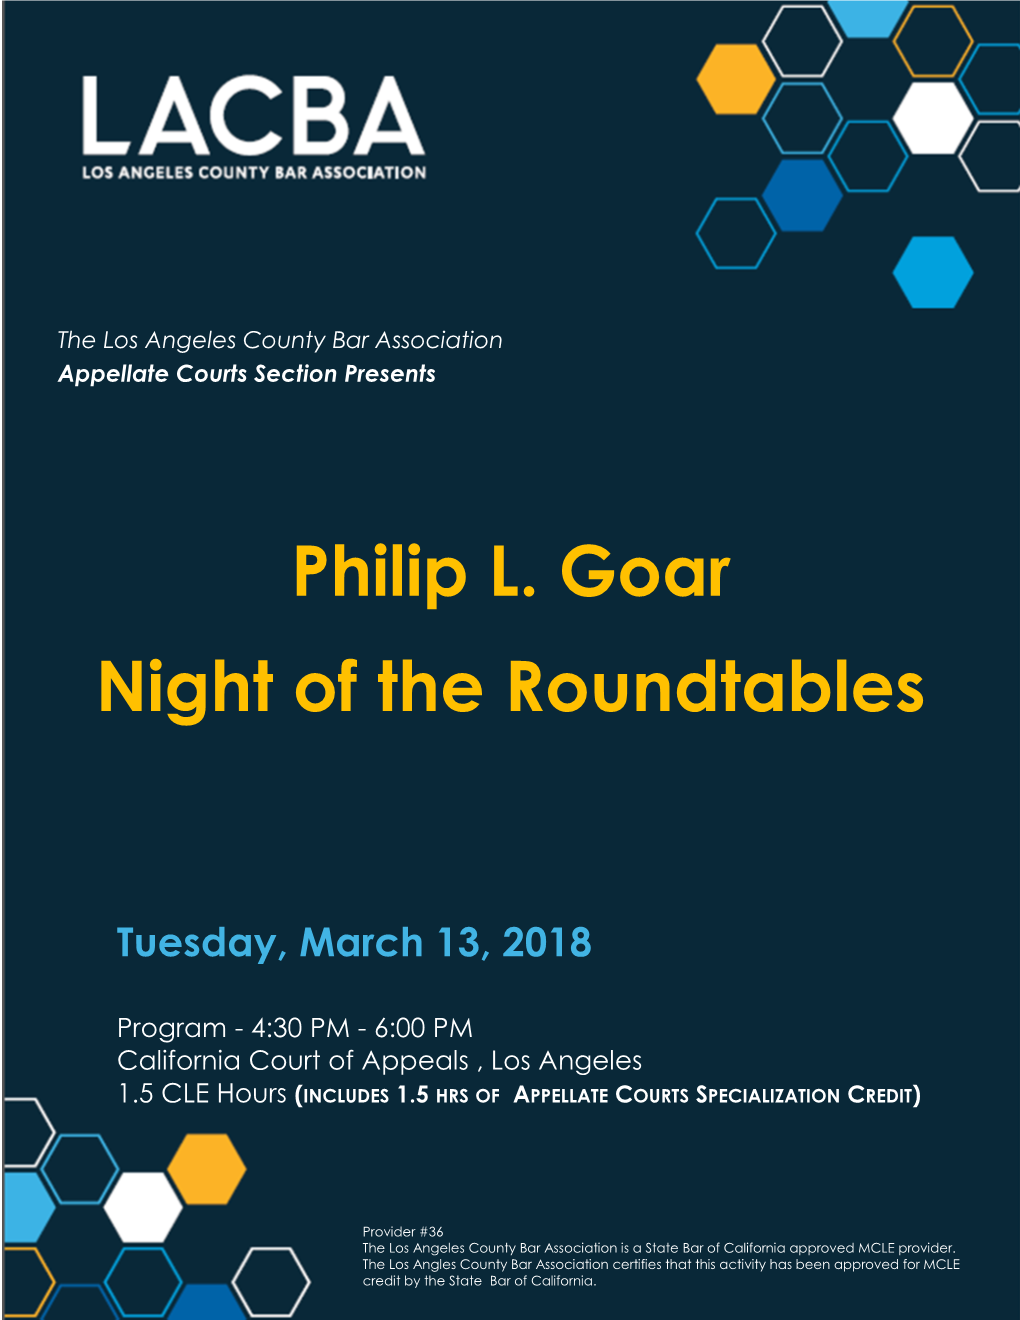 Philip L. Goar Night of the Roundtables